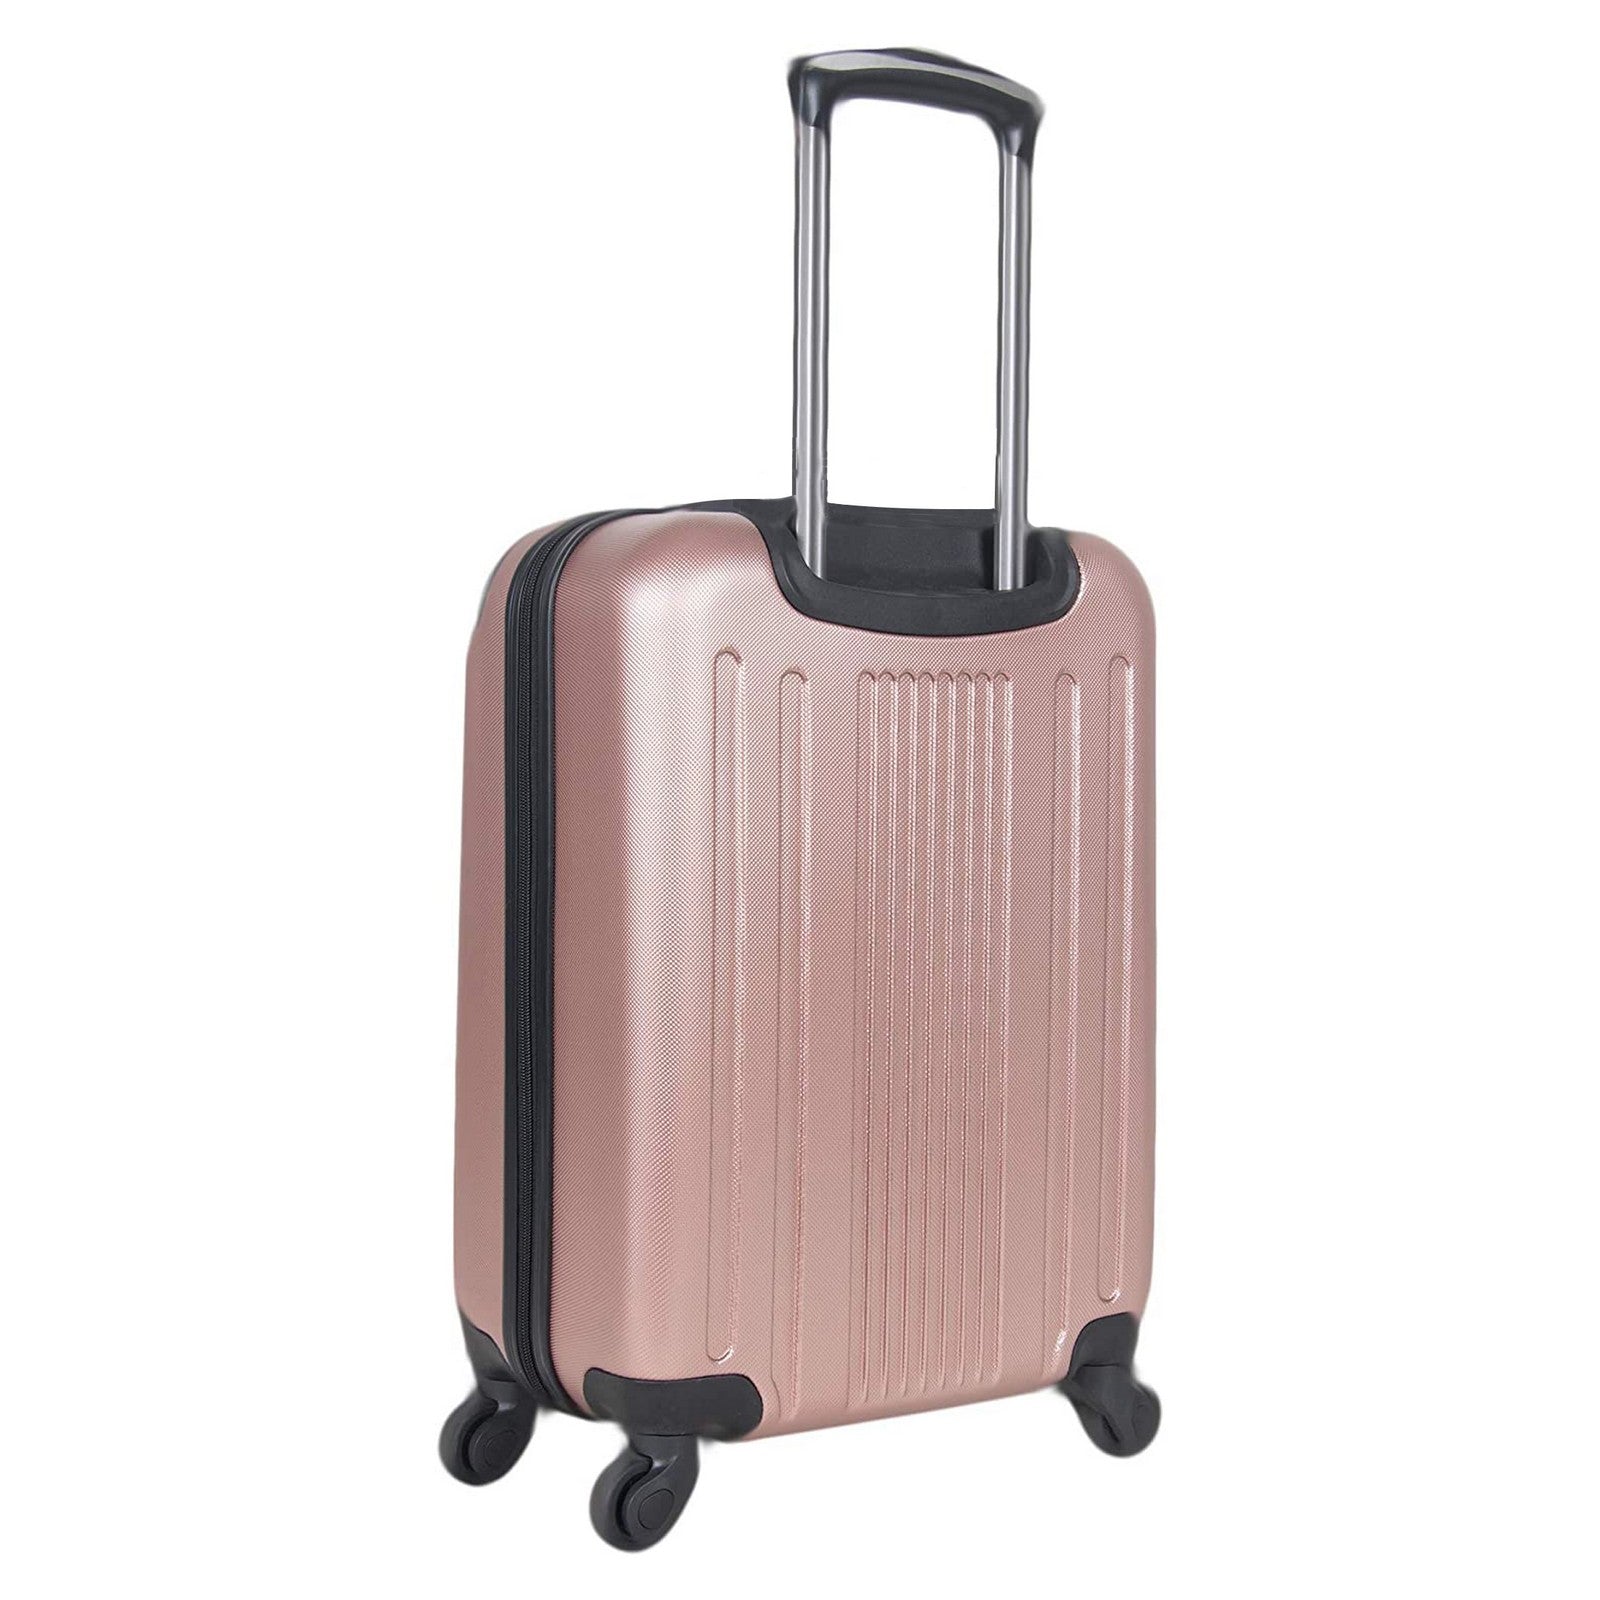 Kenneth Cole Reaction Gramercy Hardside 3-Piece Spinner Luggage Set